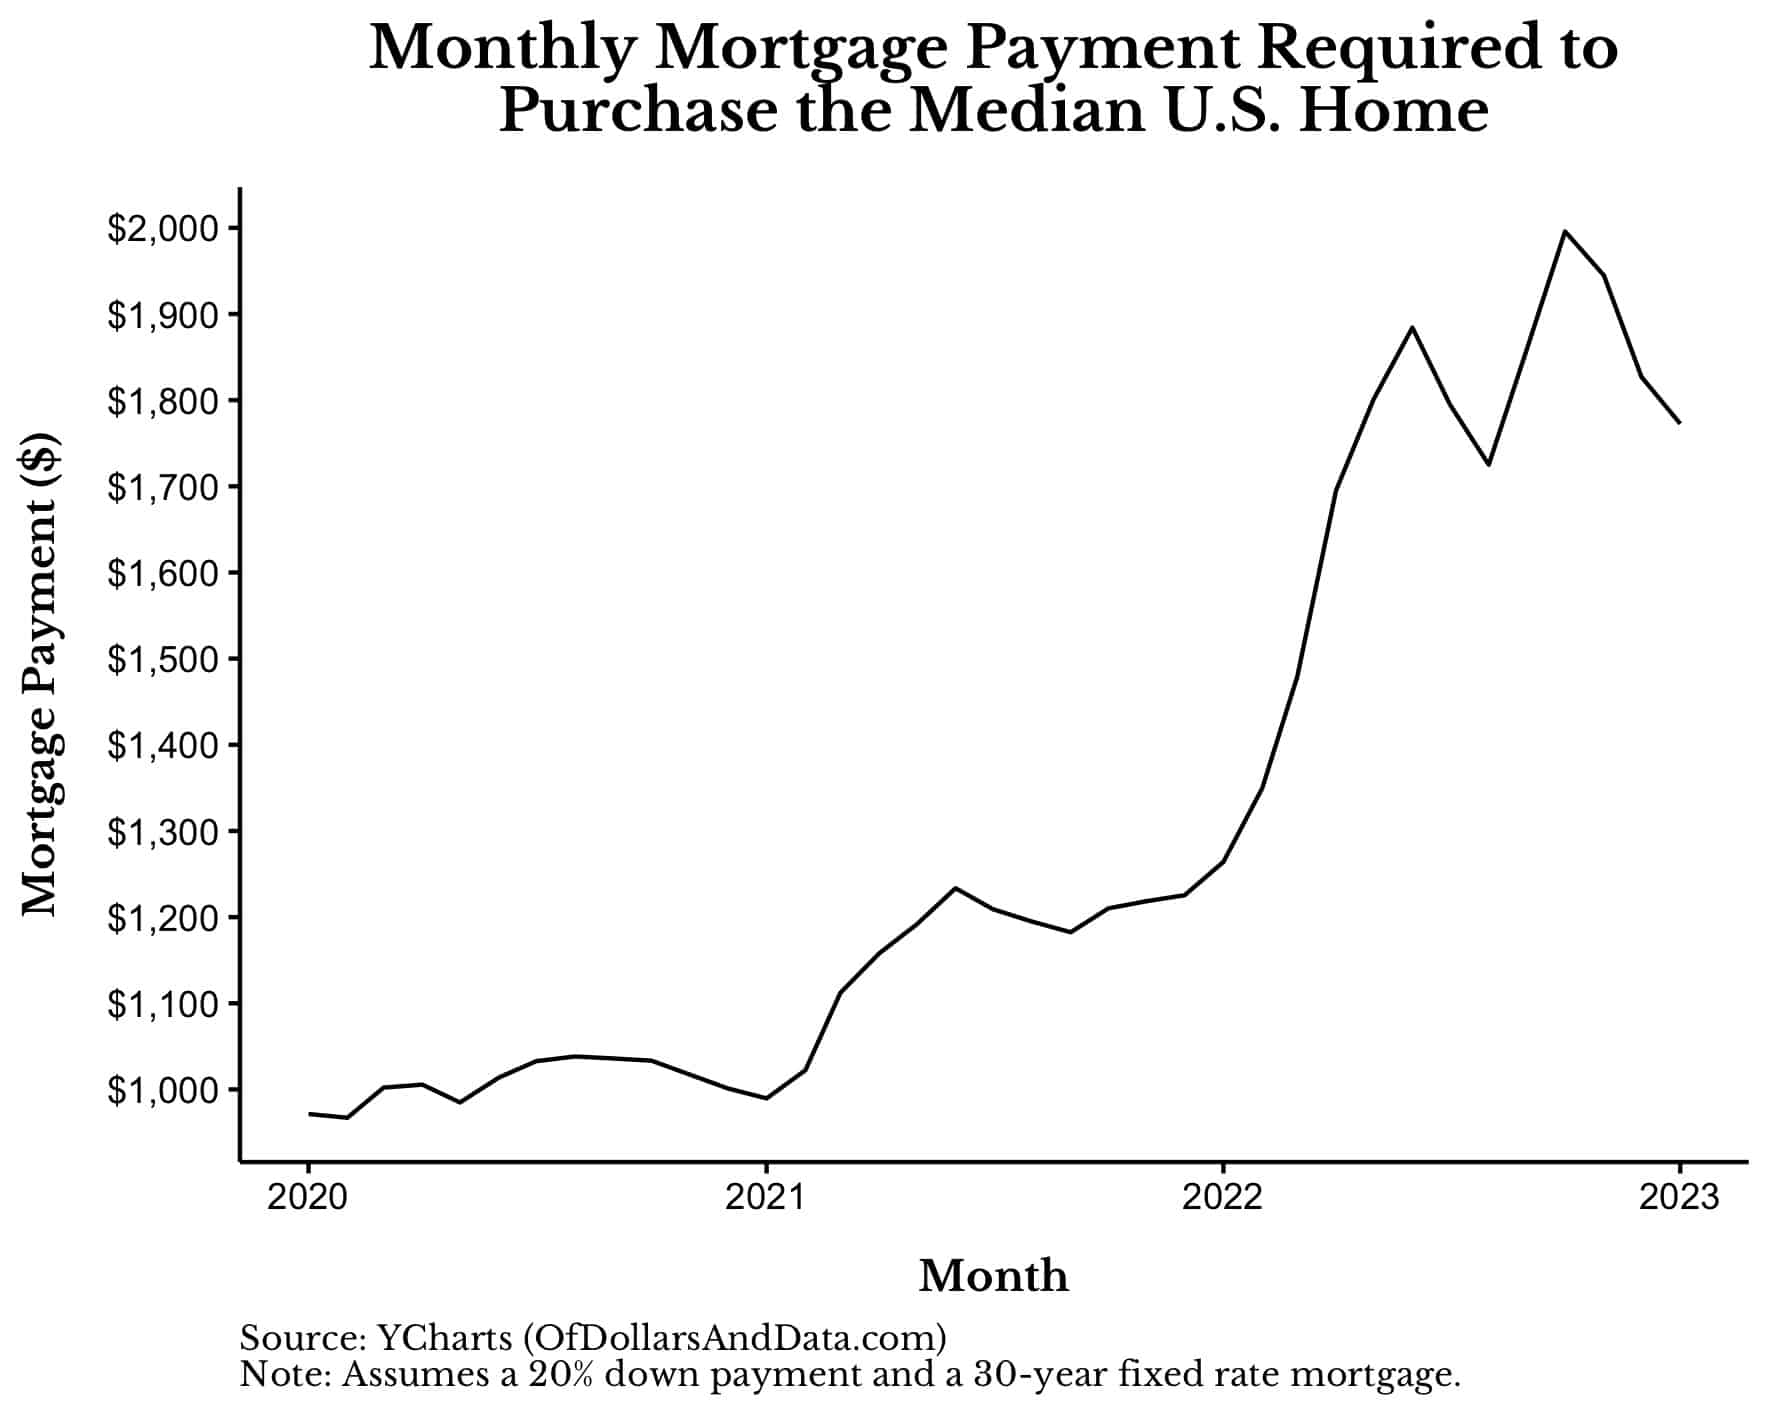 Monthly mortgage payment required for the median existing US home from 2020 to early 2023.